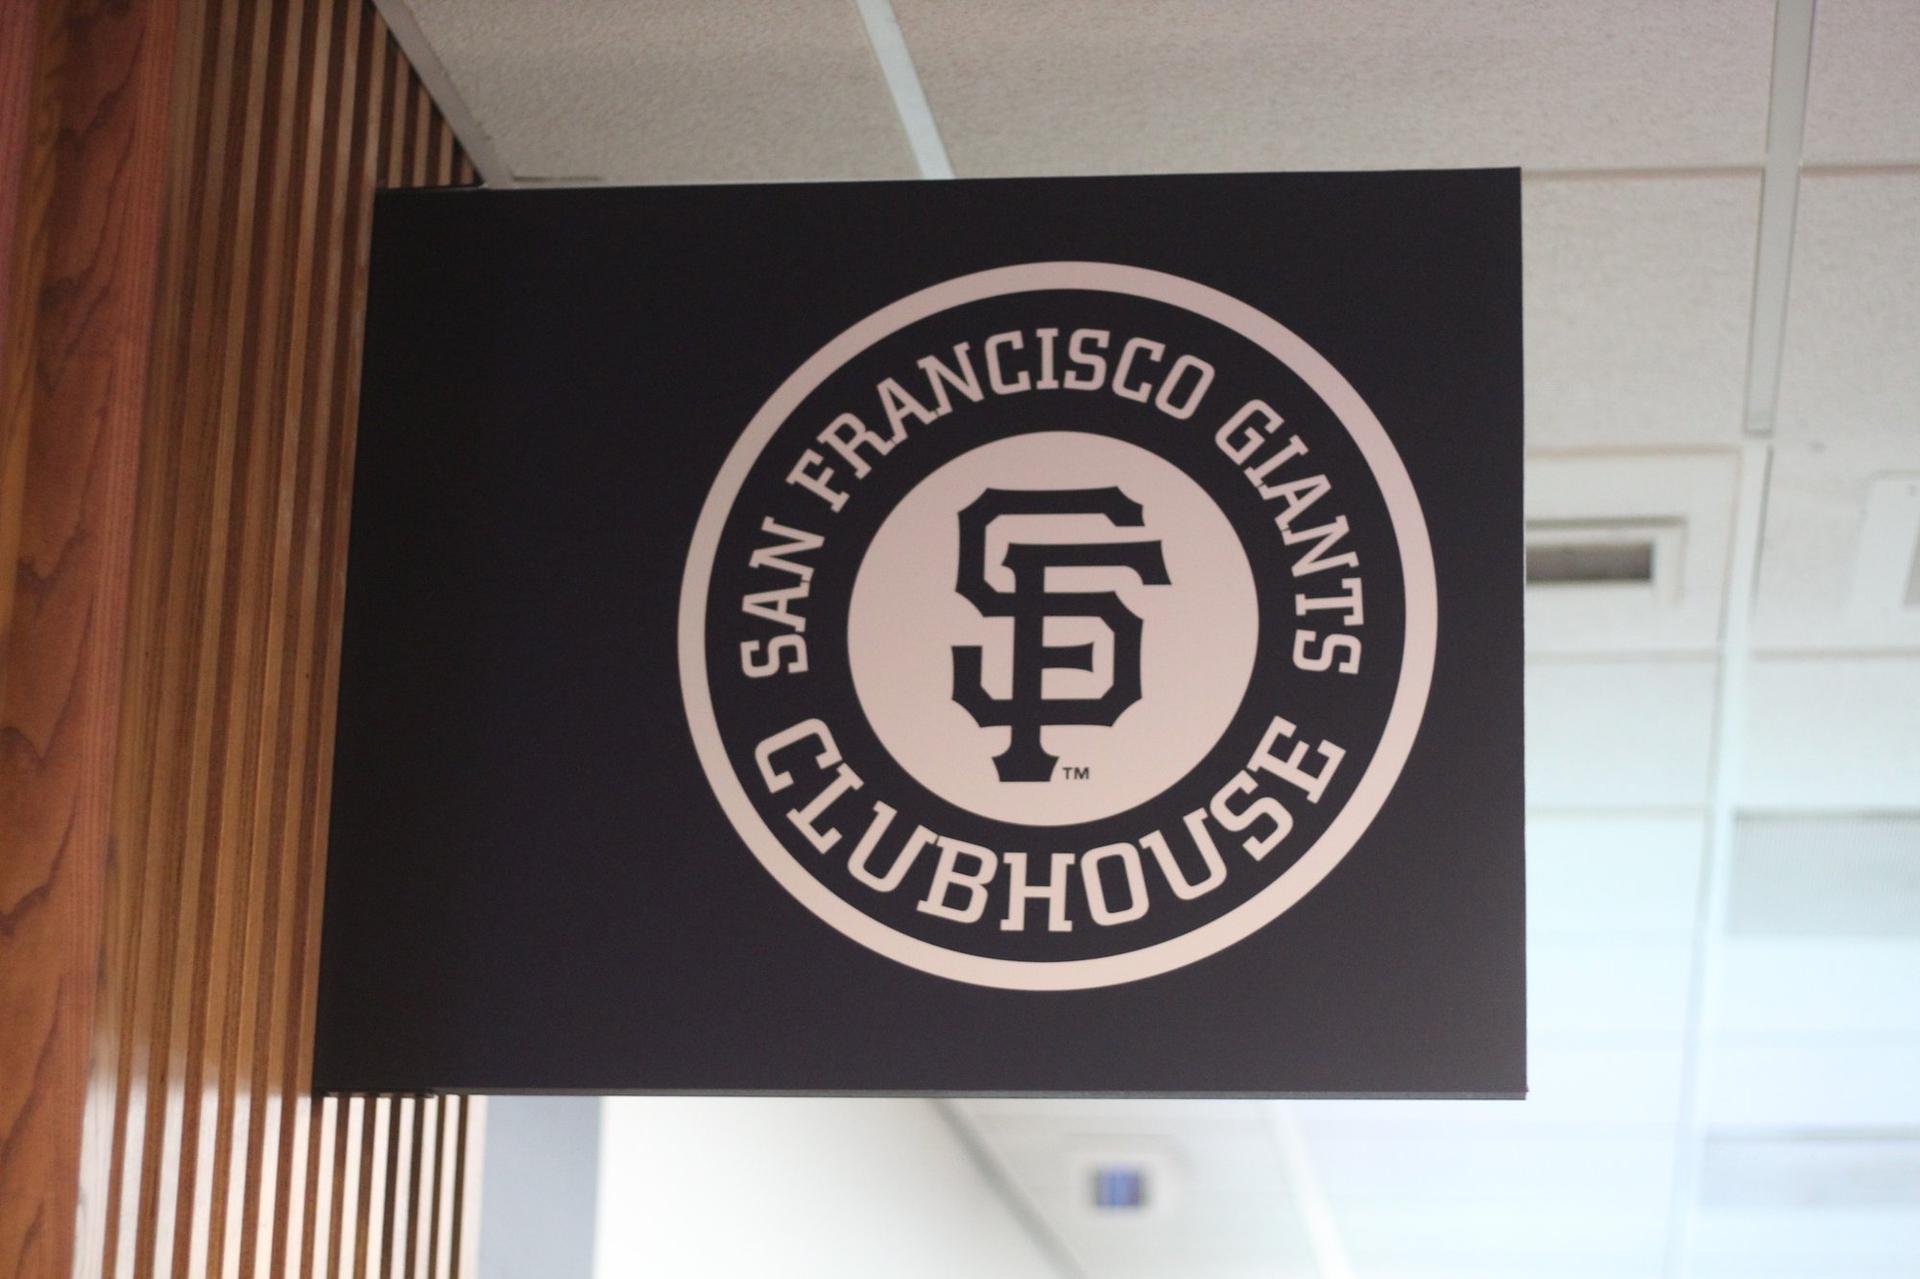 San Francisco Giants Clubhouse image 4 of 19